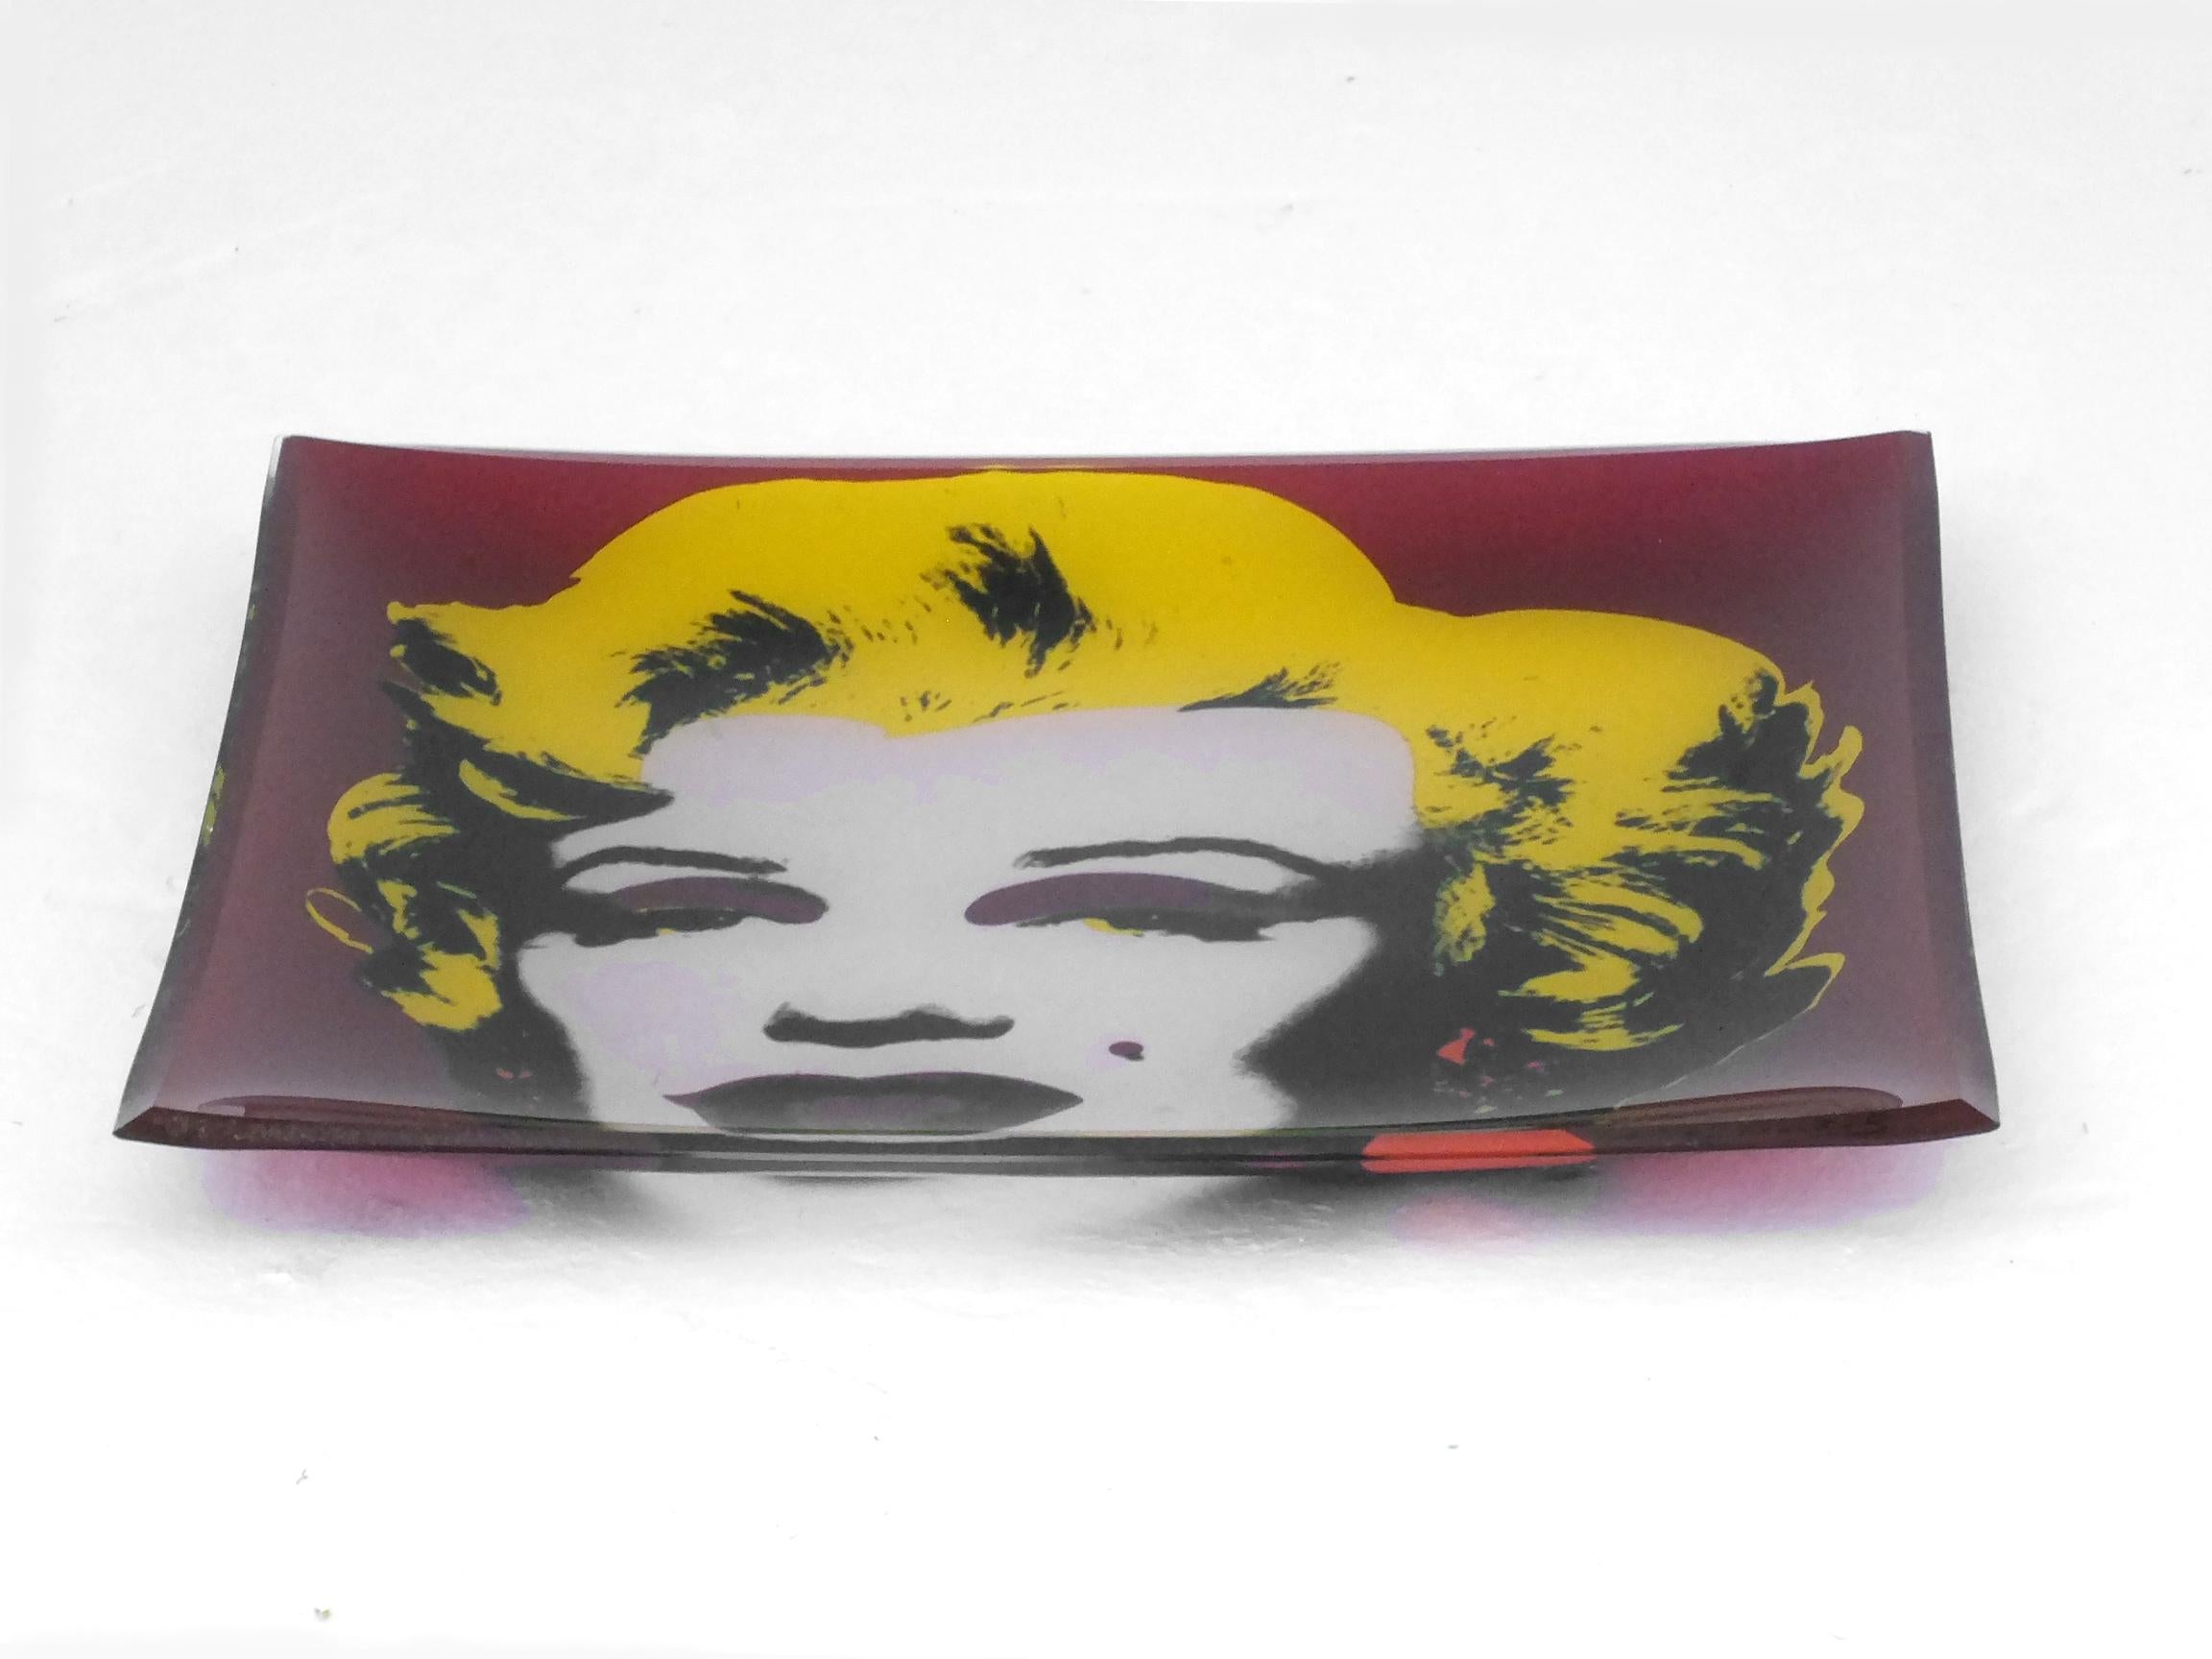 Modern Vintage Glass Square Plate Rosenthal Marilyn Monroe Celebrity Series Andy Warhol For Sale